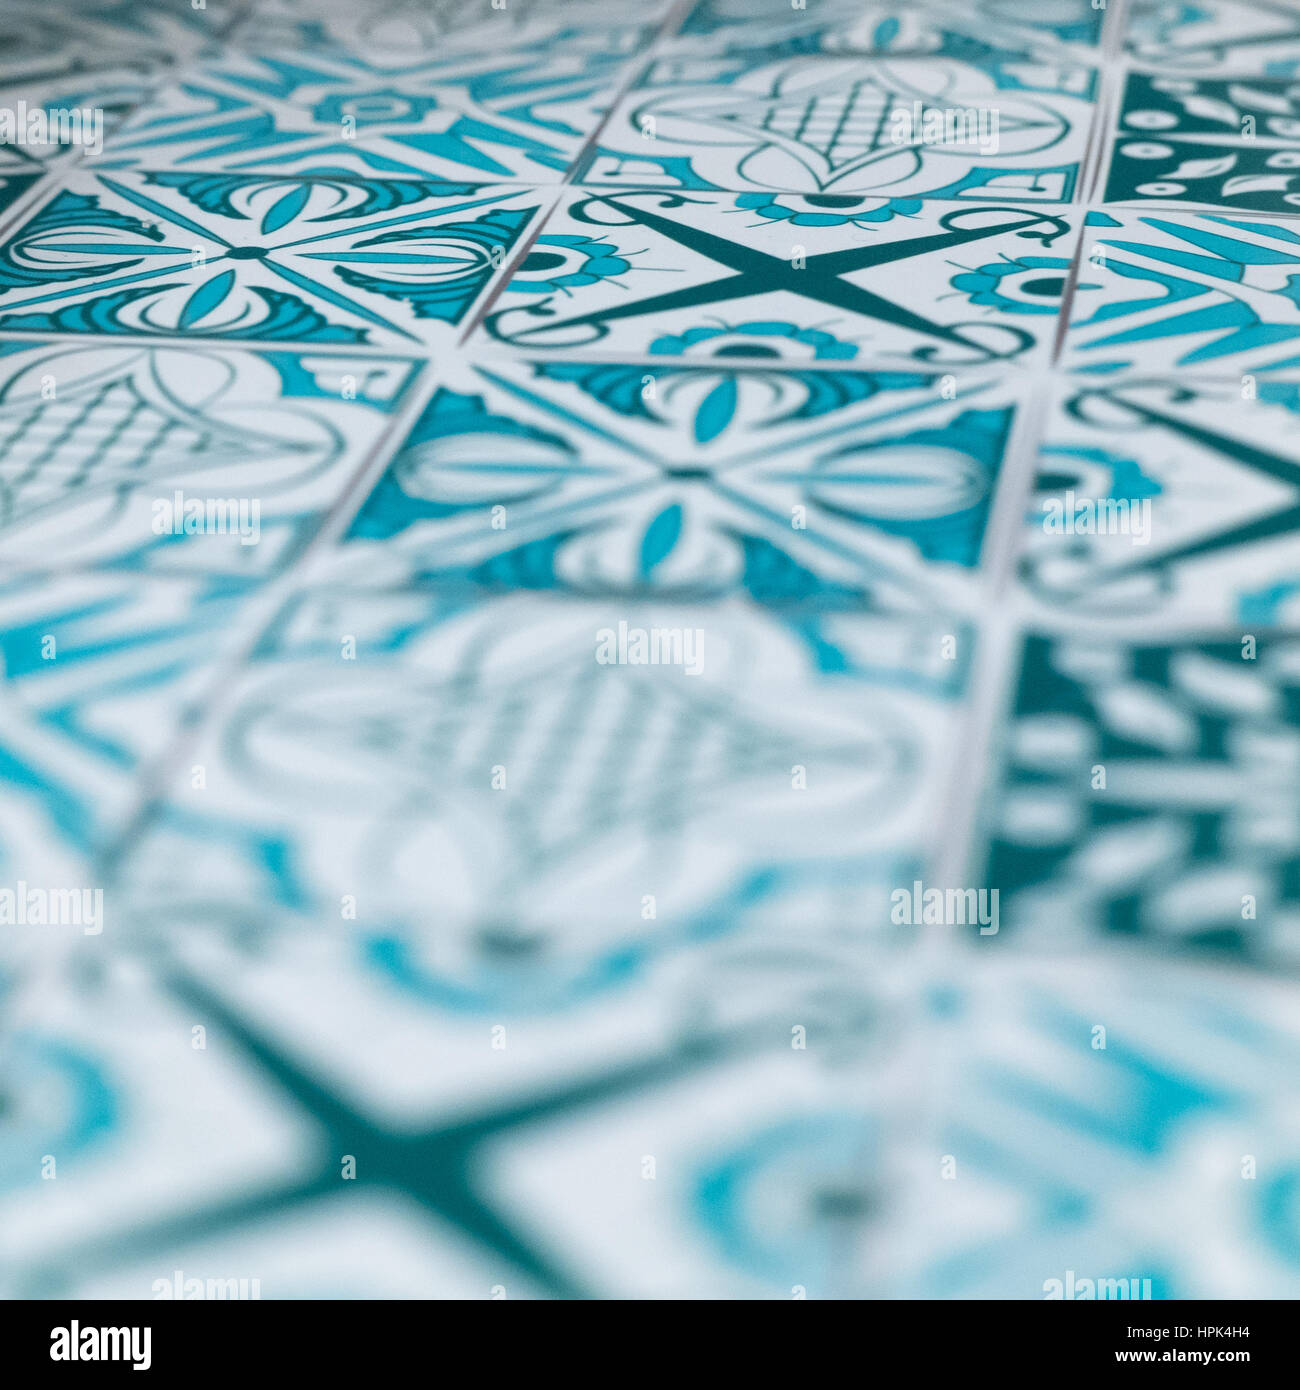 Abstract blue patterns with blurred area. Stock Photo